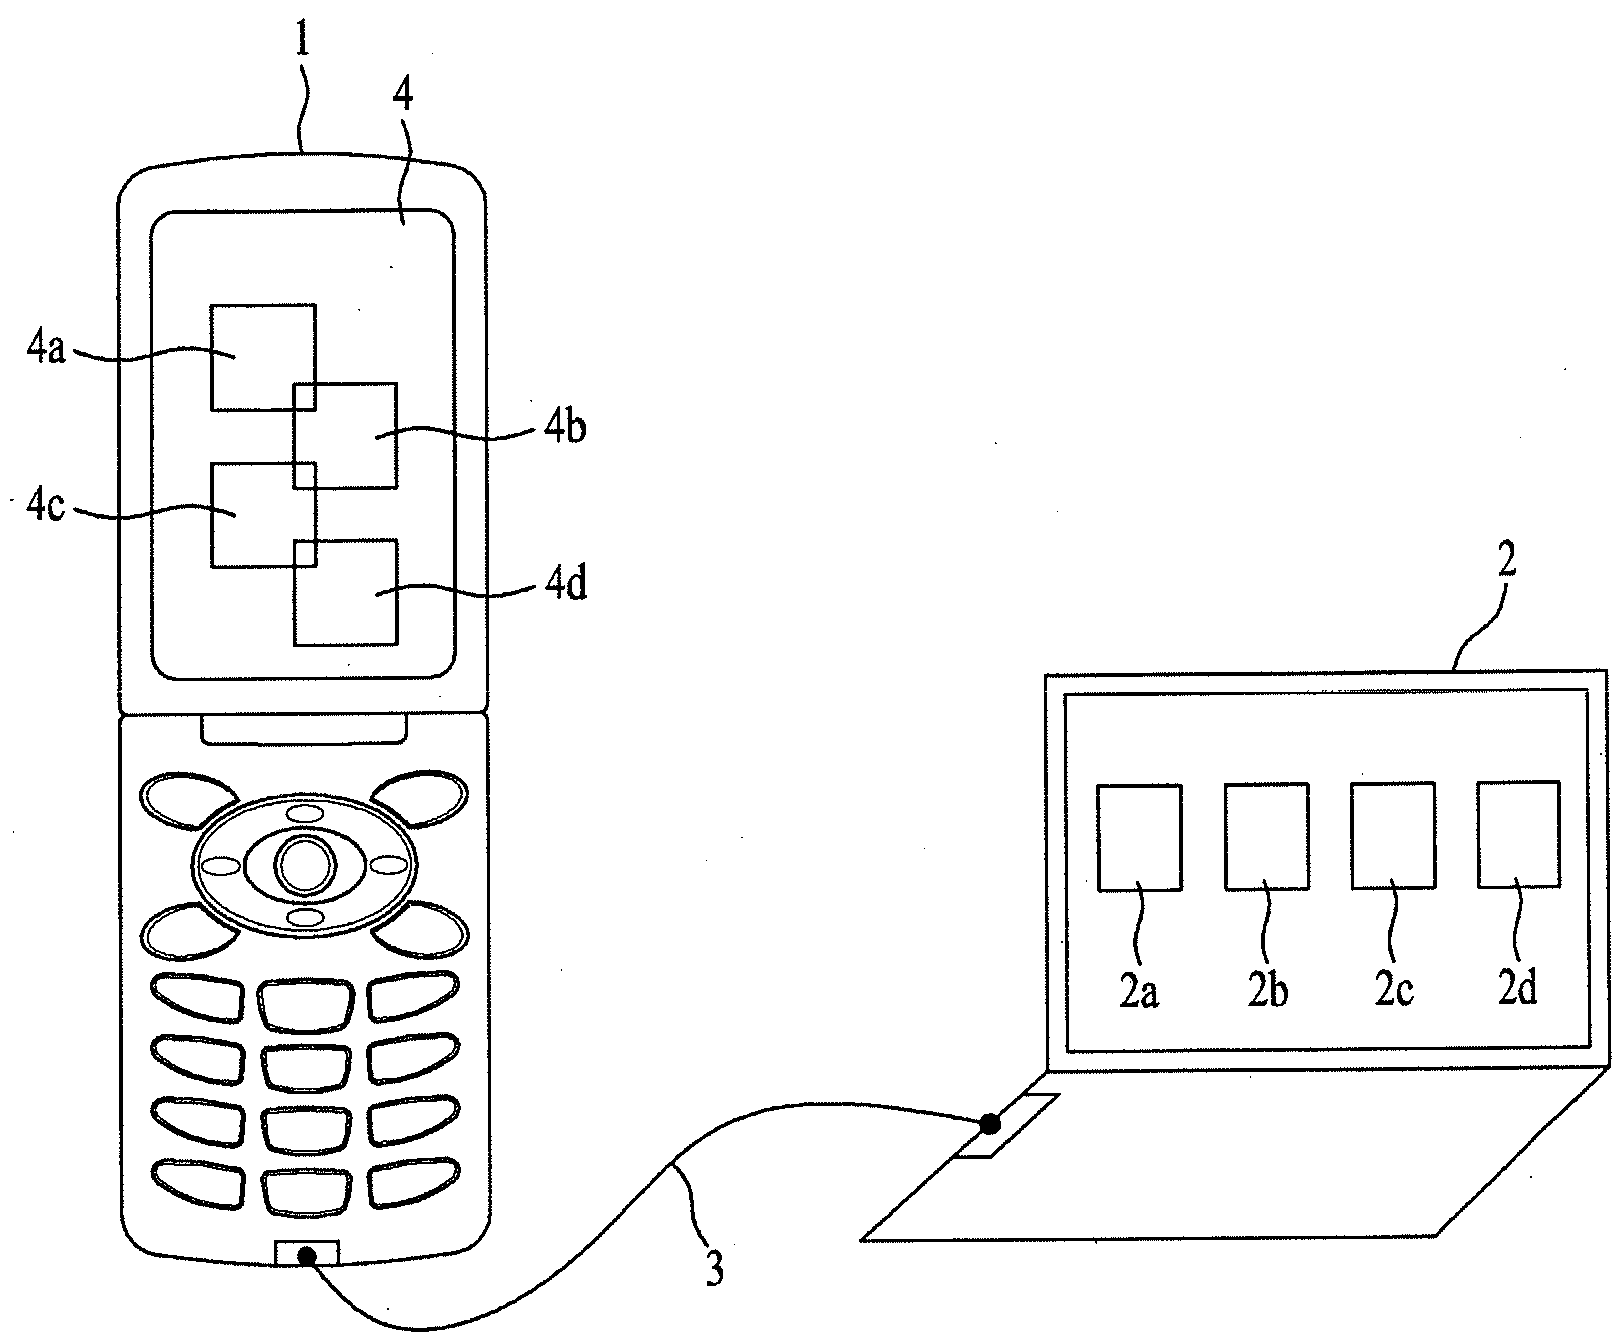 Communication device and a host device, a method of processing signal in the communication device and the host device, and a system having the communication device and the host device